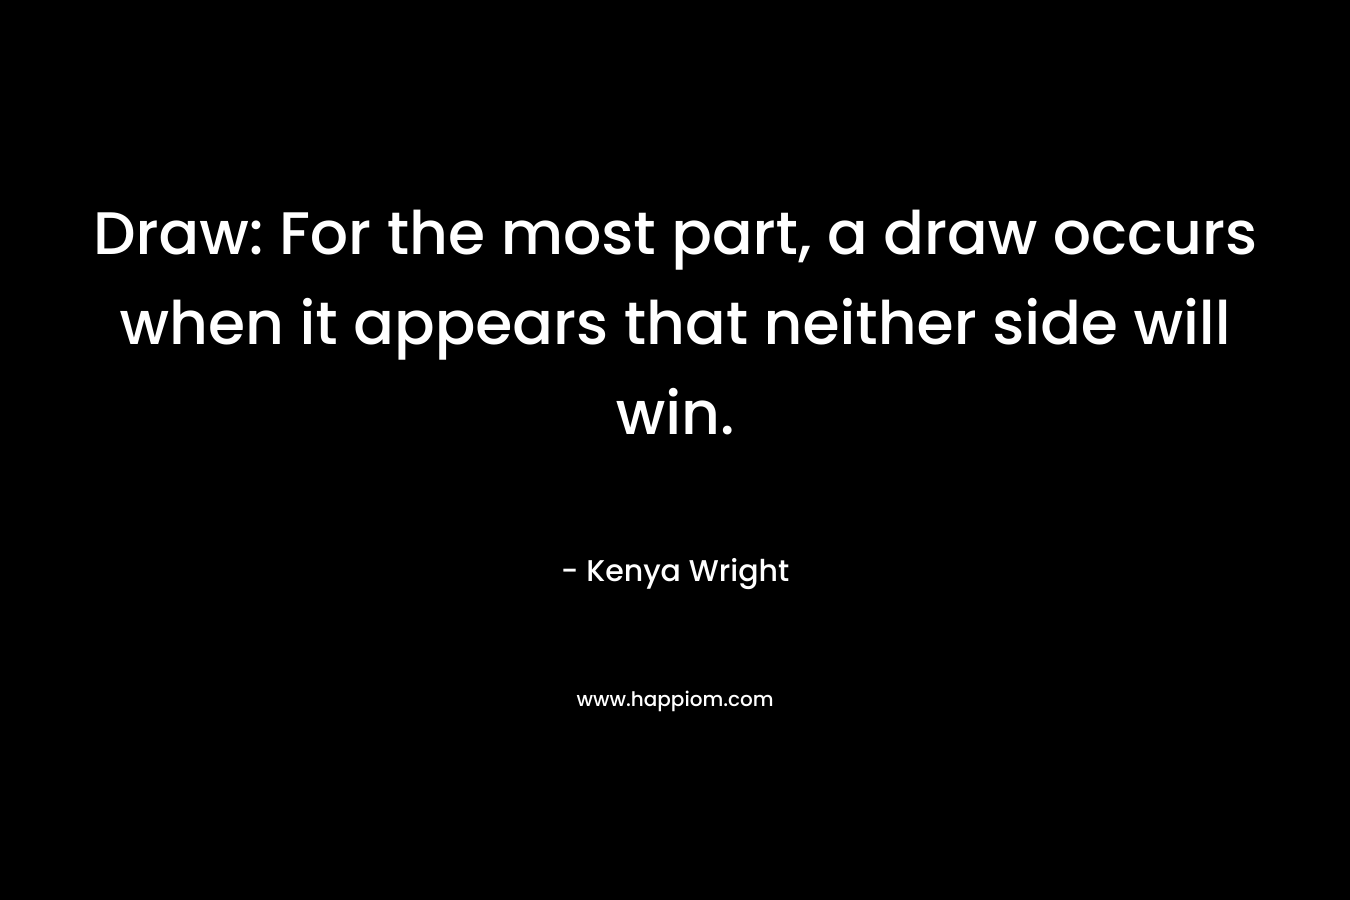 Draw: For the most part, a draw occurs when it appears that neither side will win.